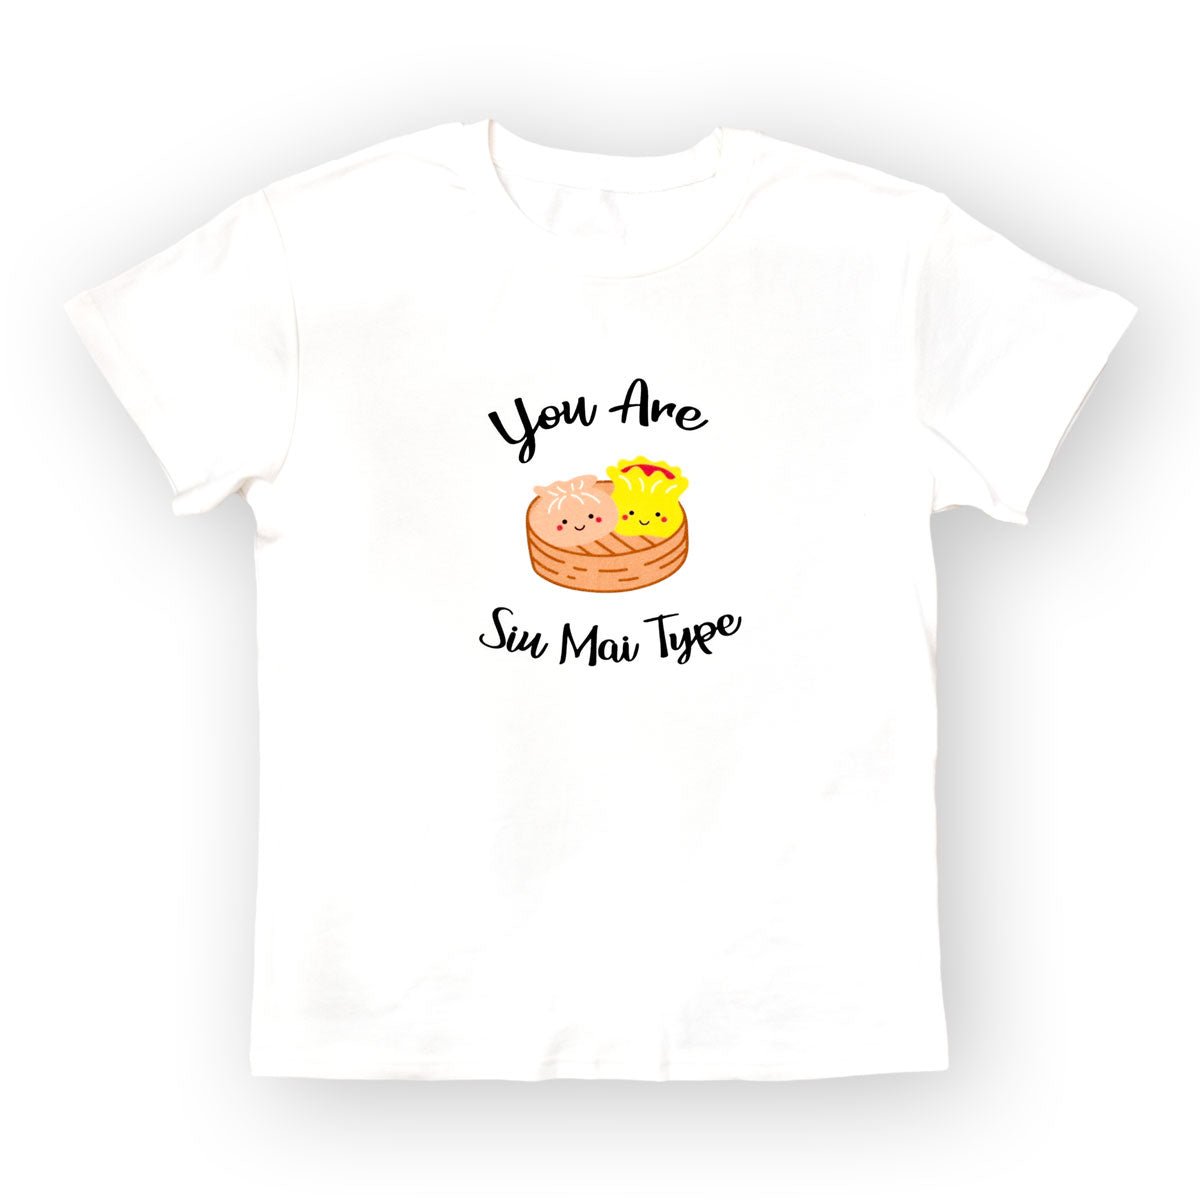 the wee bean organic cotton adult womens tee in dim sum